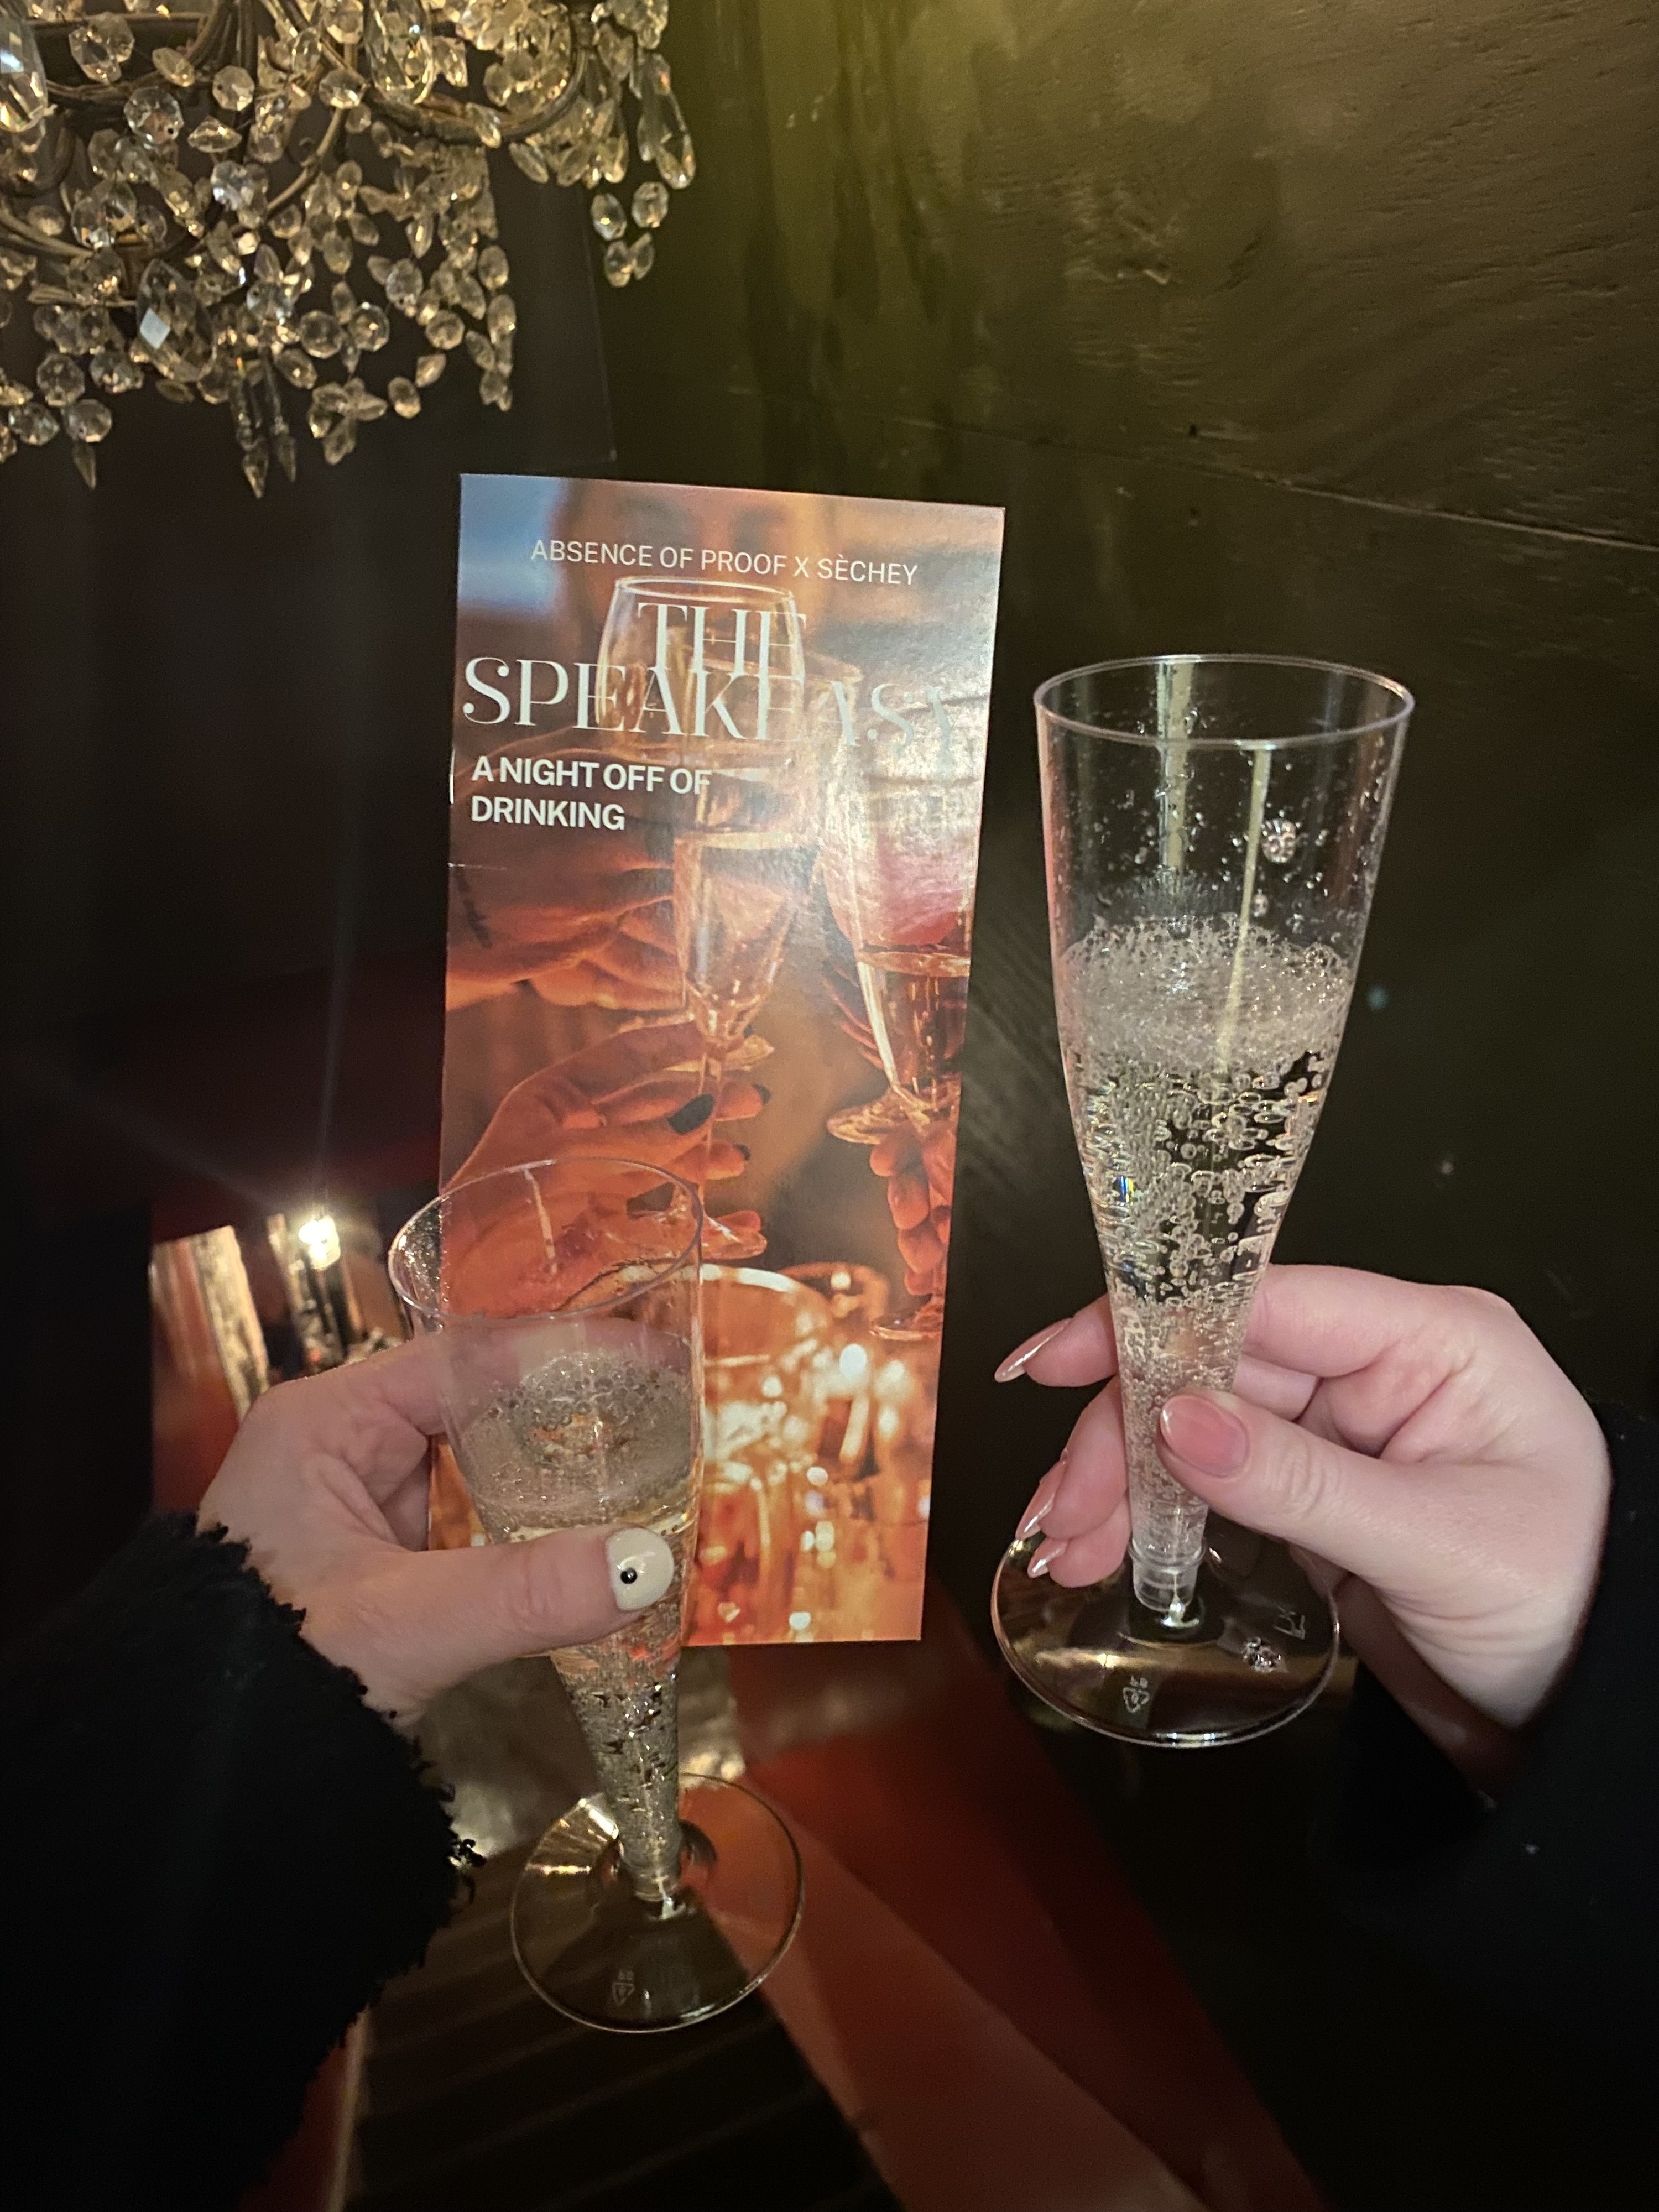 The pamphlet and two hands holding glasses of nonalcoholic champagne